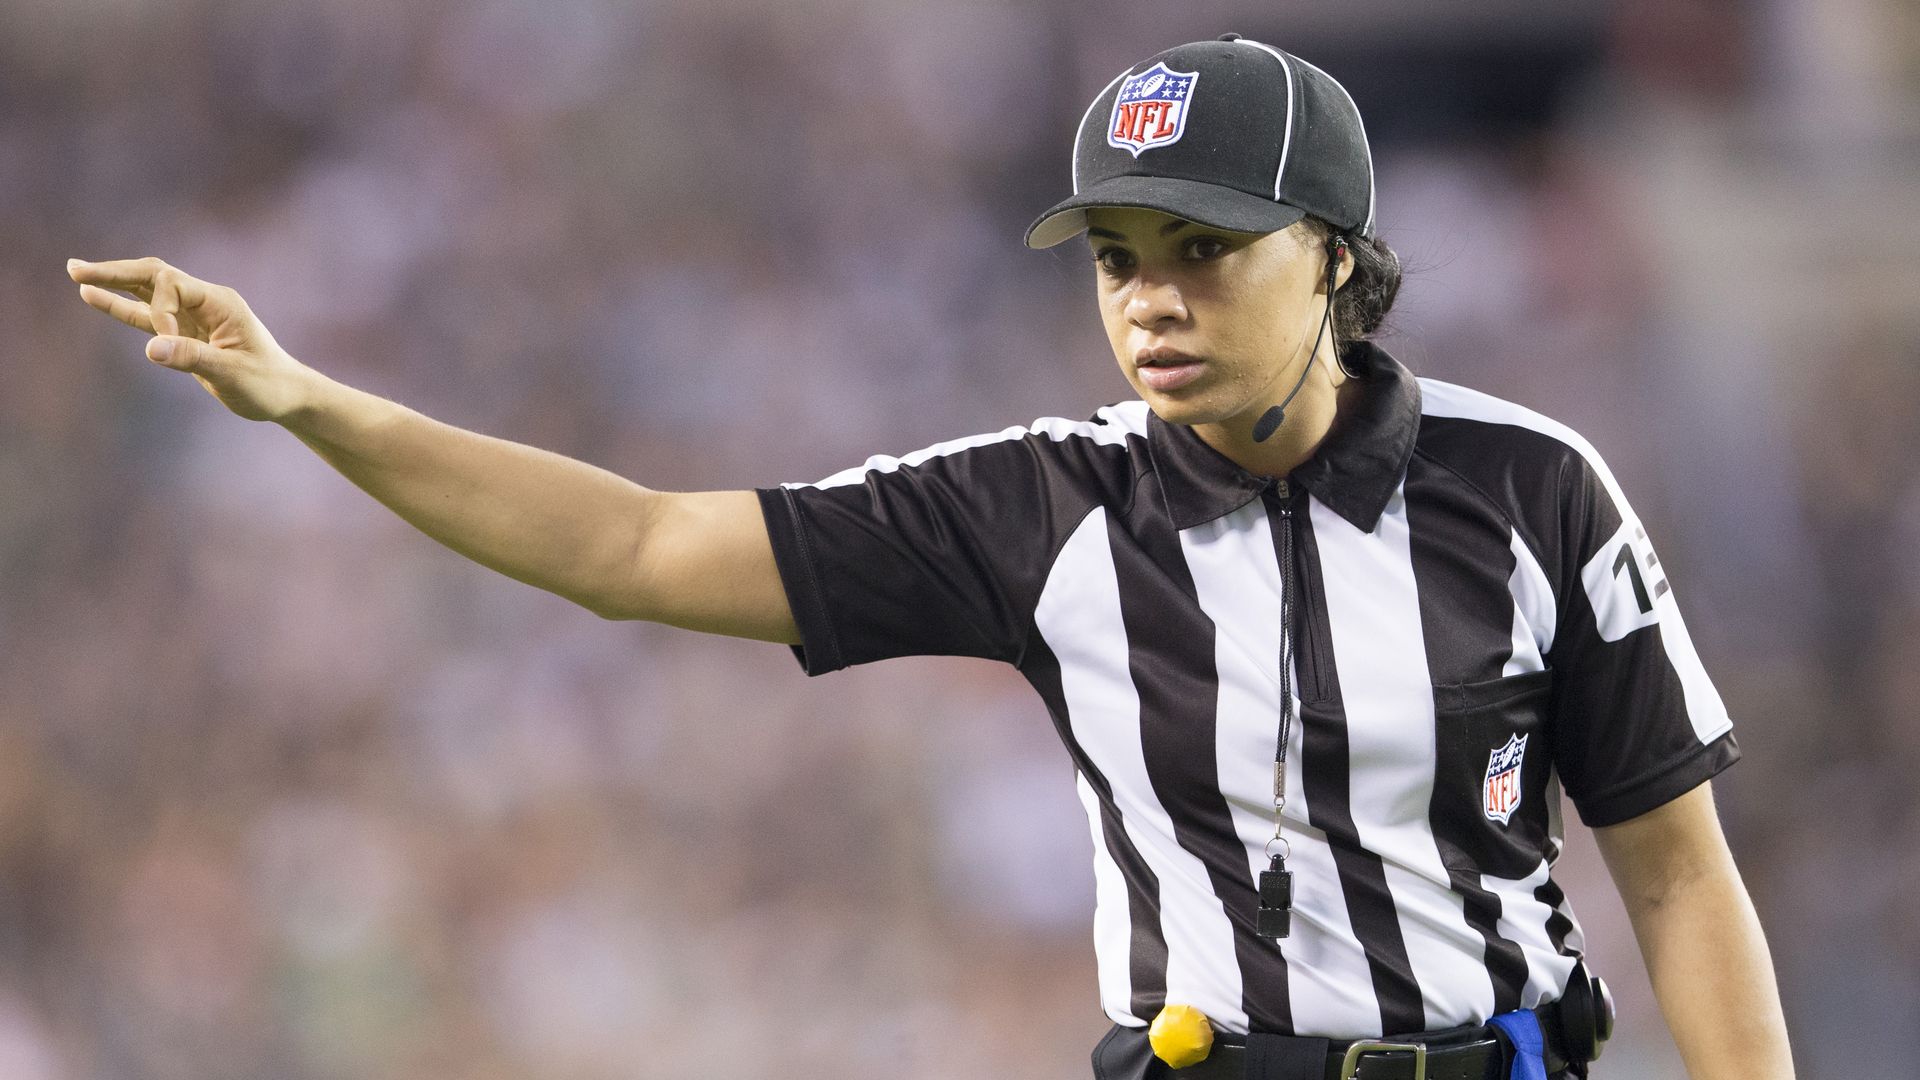 official nfl referee hat